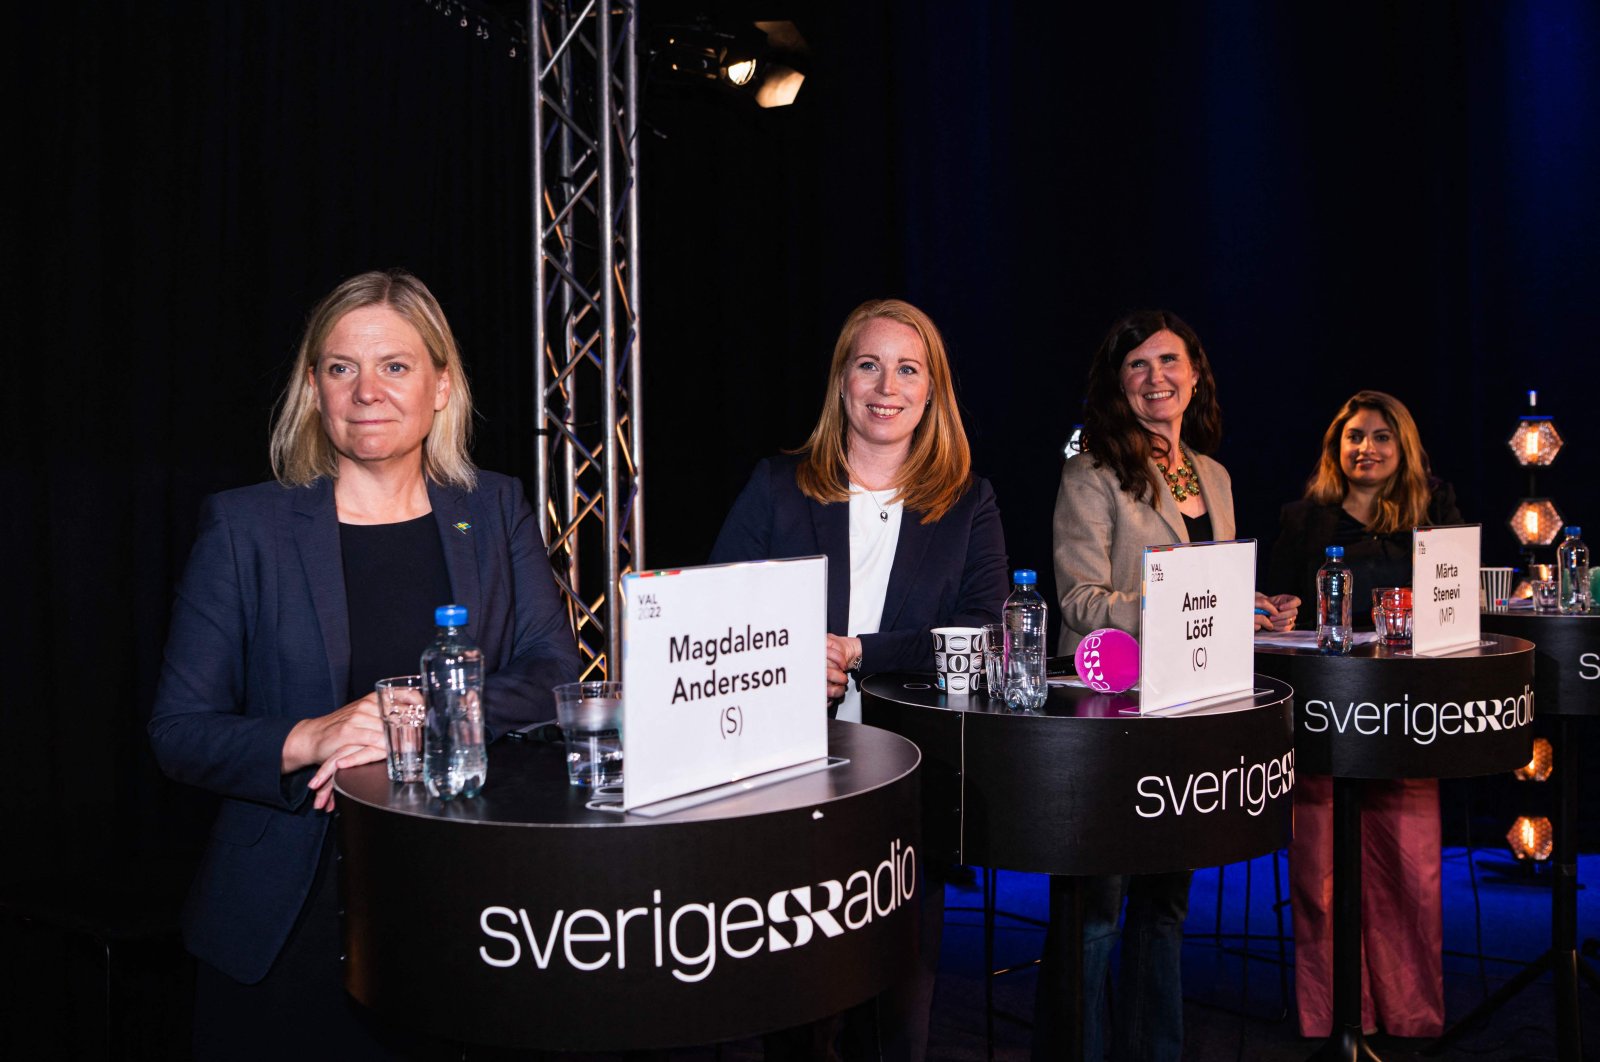 This photo shows (L to R) Swedish Prime Minister and leader of the Social Democrats Magdalena Andersson, Annie Loof, leader of the Center Party, Marta Stenevi of the Green Party, and Nooshi Dadgostar, leader of the Left Party, during a debate organized by Swedish Radio together with other party leaders in Stockholm, Sweden, Sept. 2, 2022. (AFP Photo)